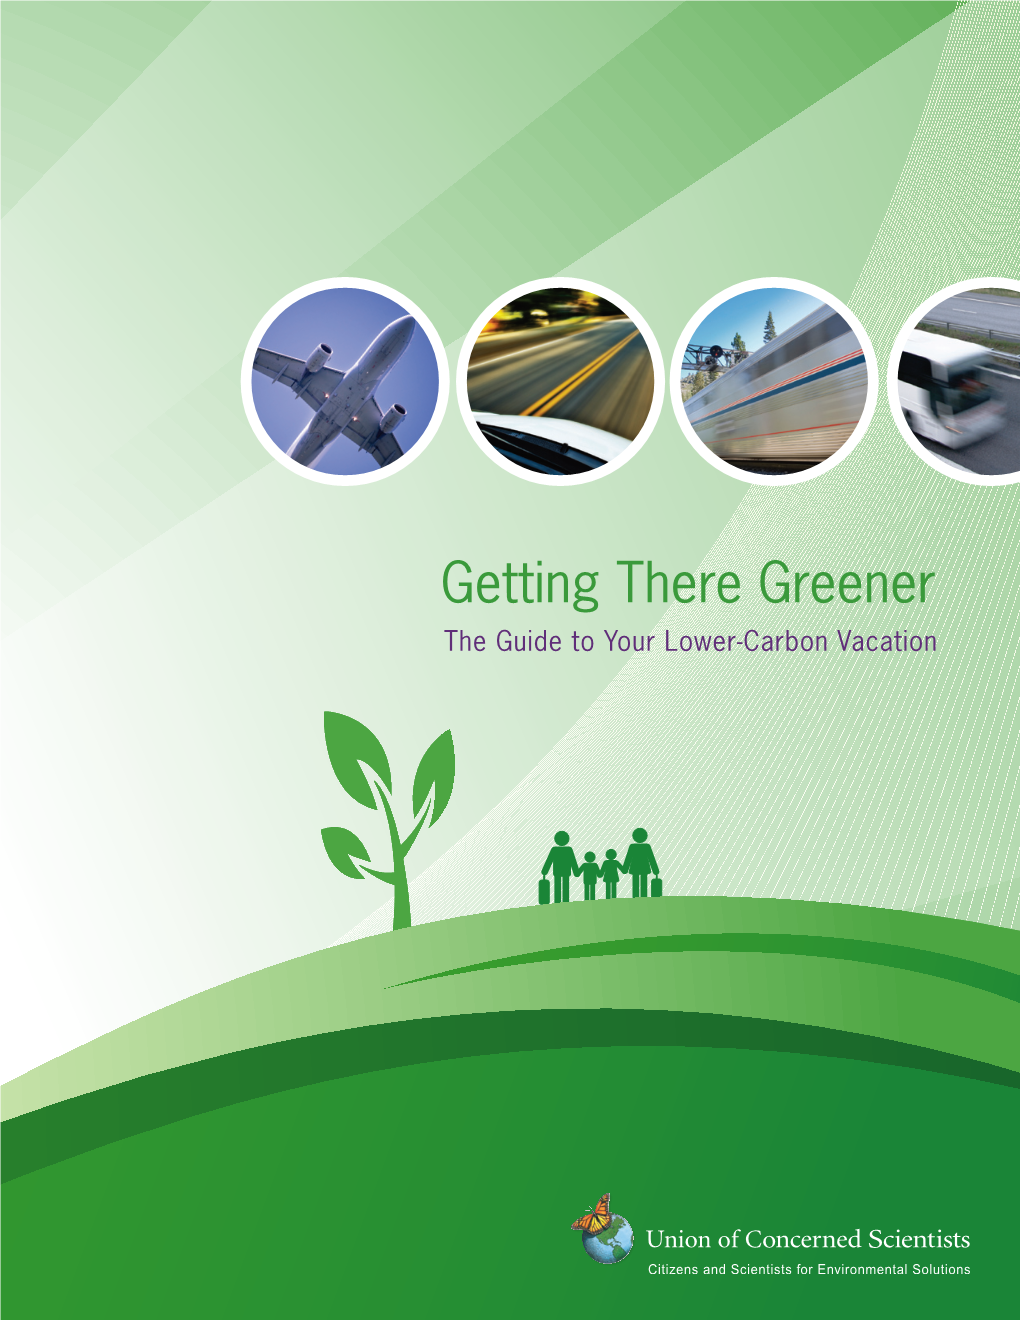 Getting There Greener the Guide to Your Lower-Carbon Vacation